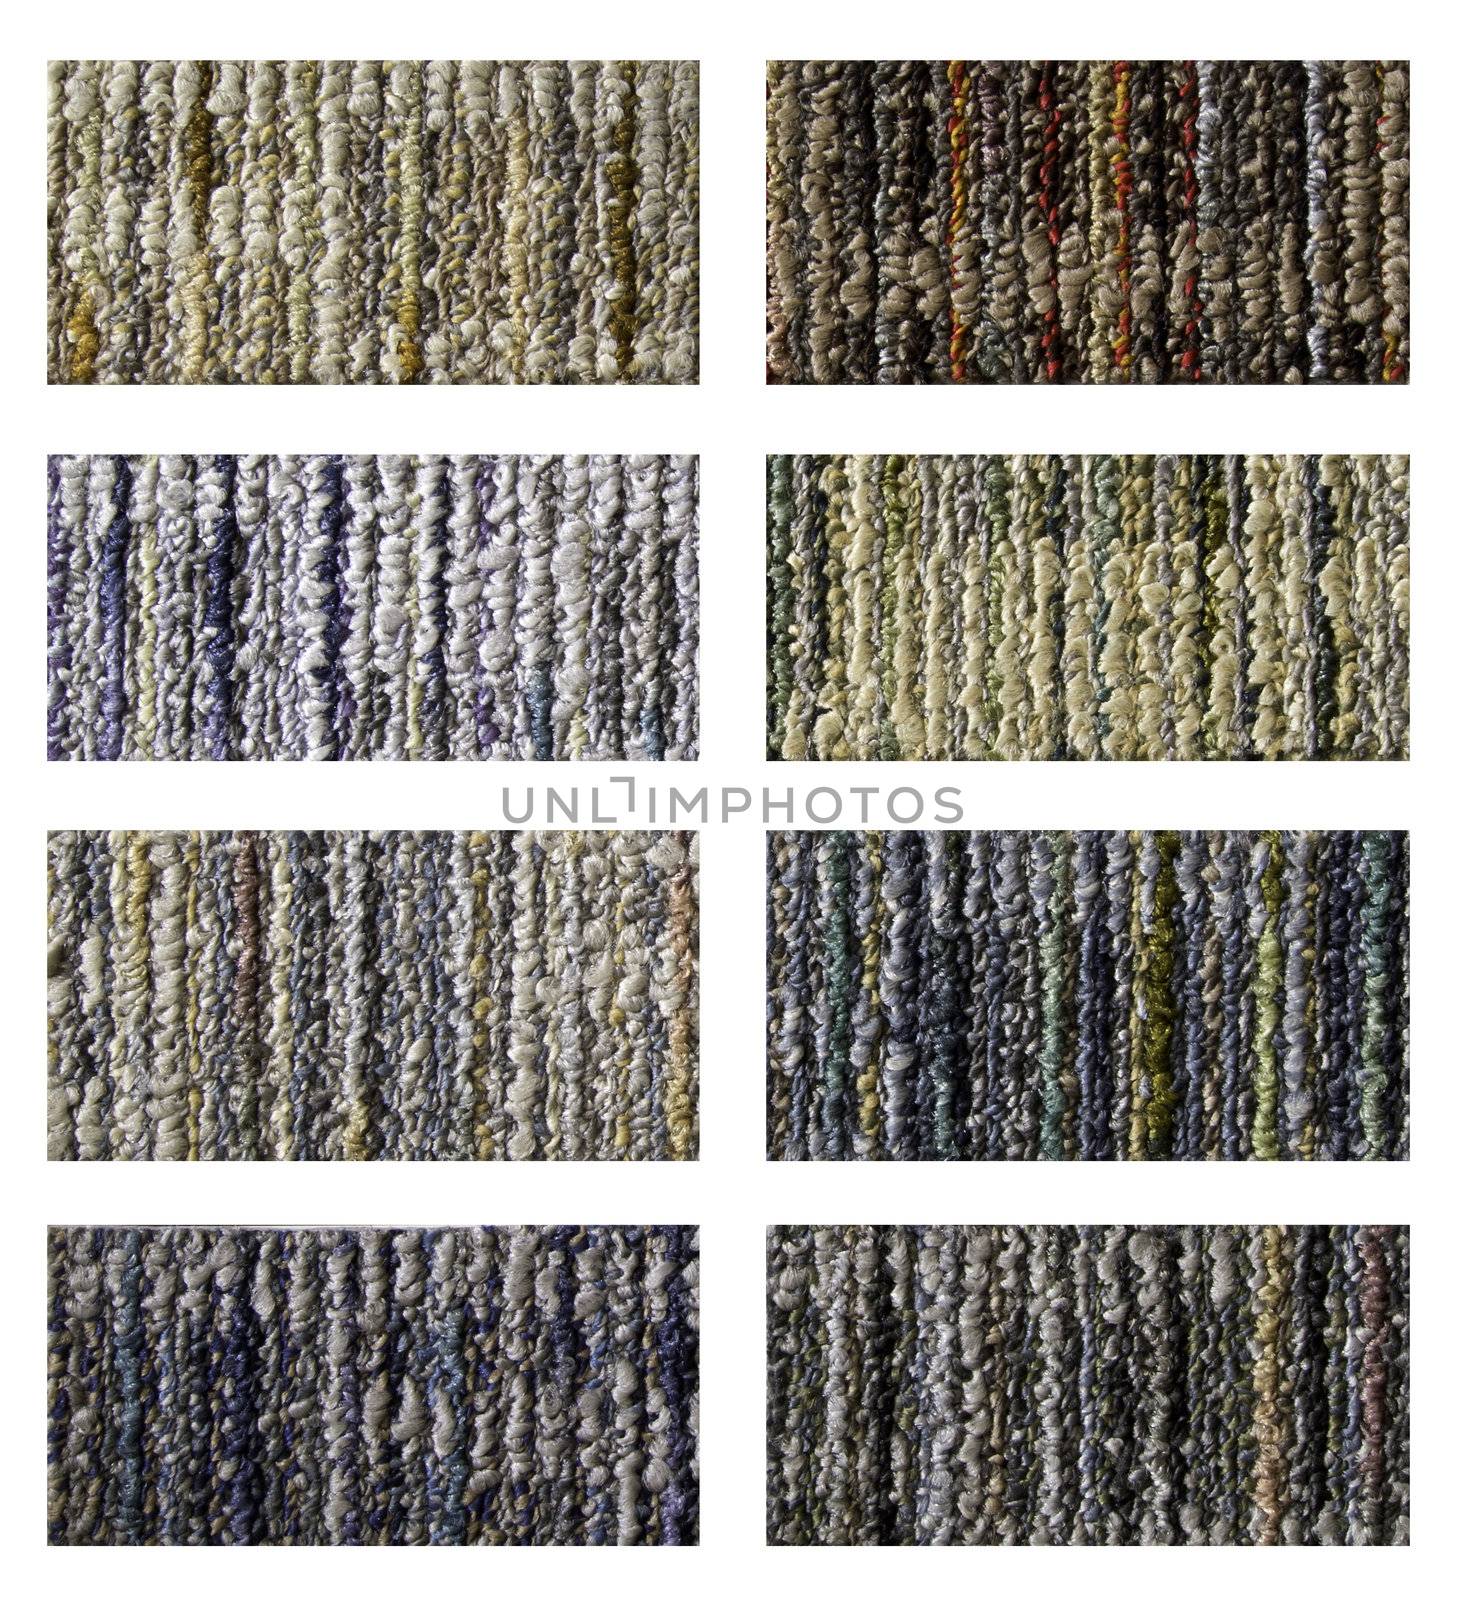 Samples of collection carpet on a white background 